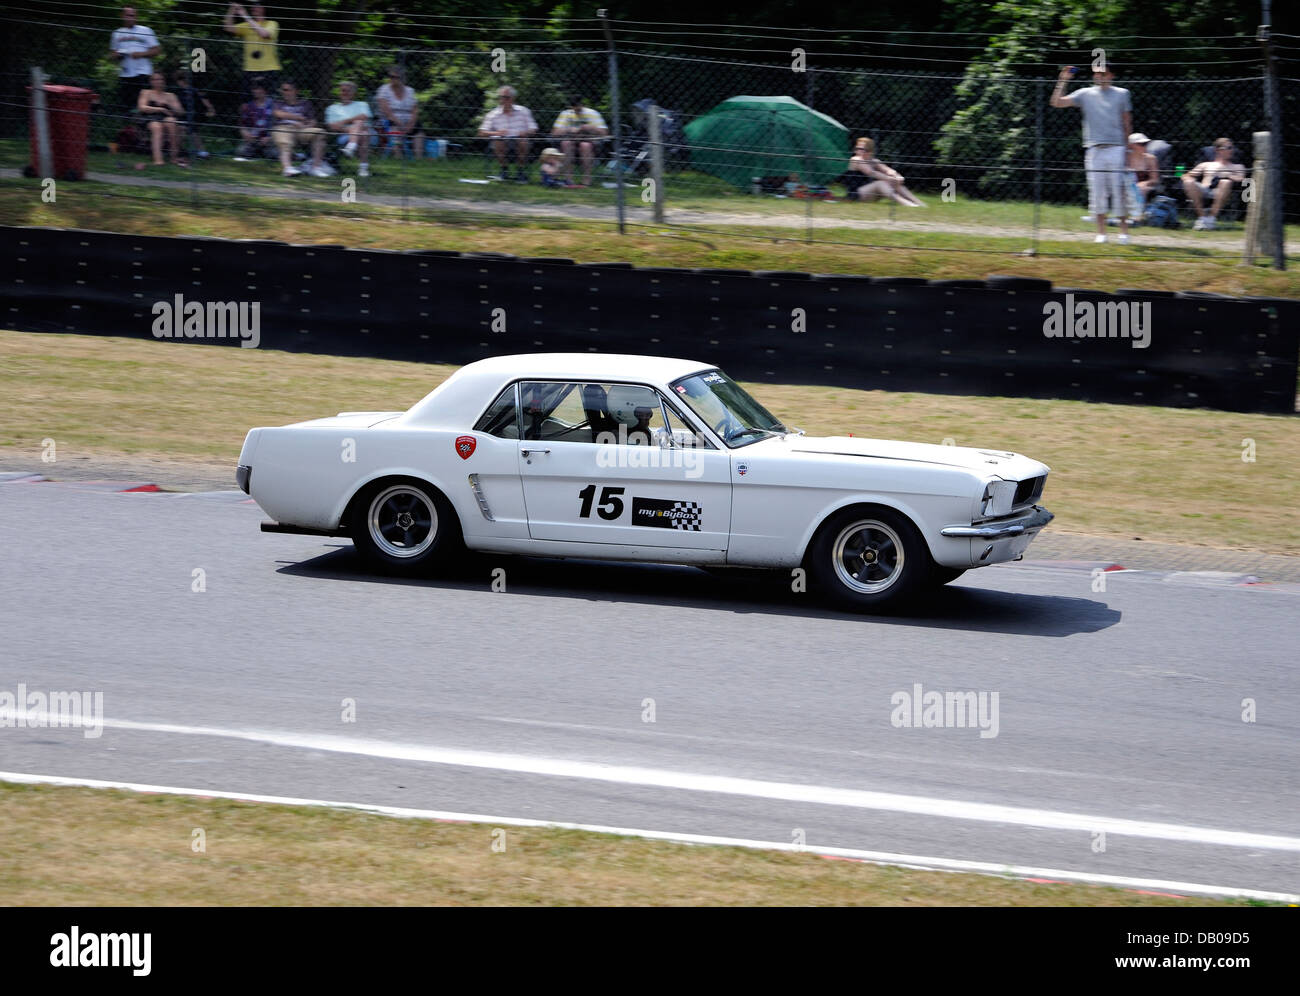 White old Ford Mustang racing su pista Foto Stock